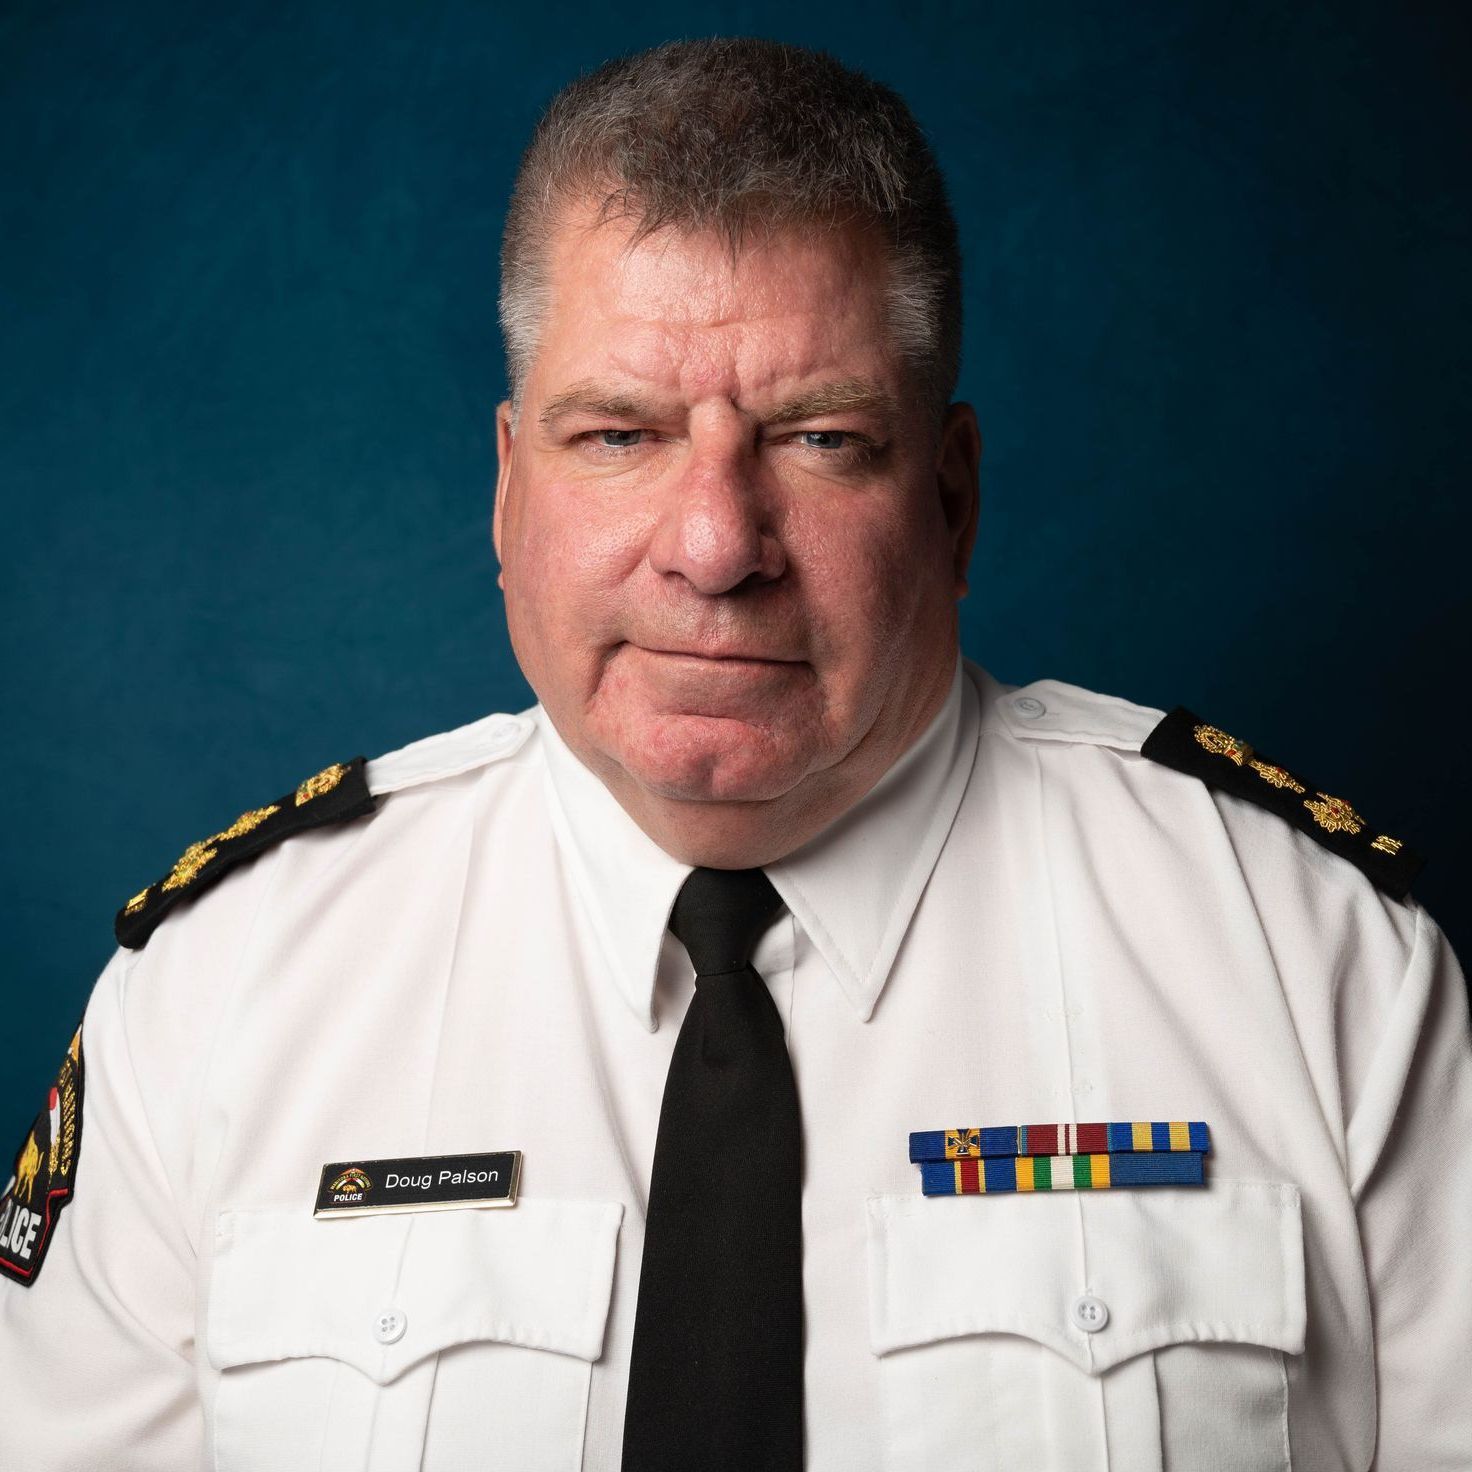 MFNPS-Manitoba First Nations Police Service - Chief Doug Palson